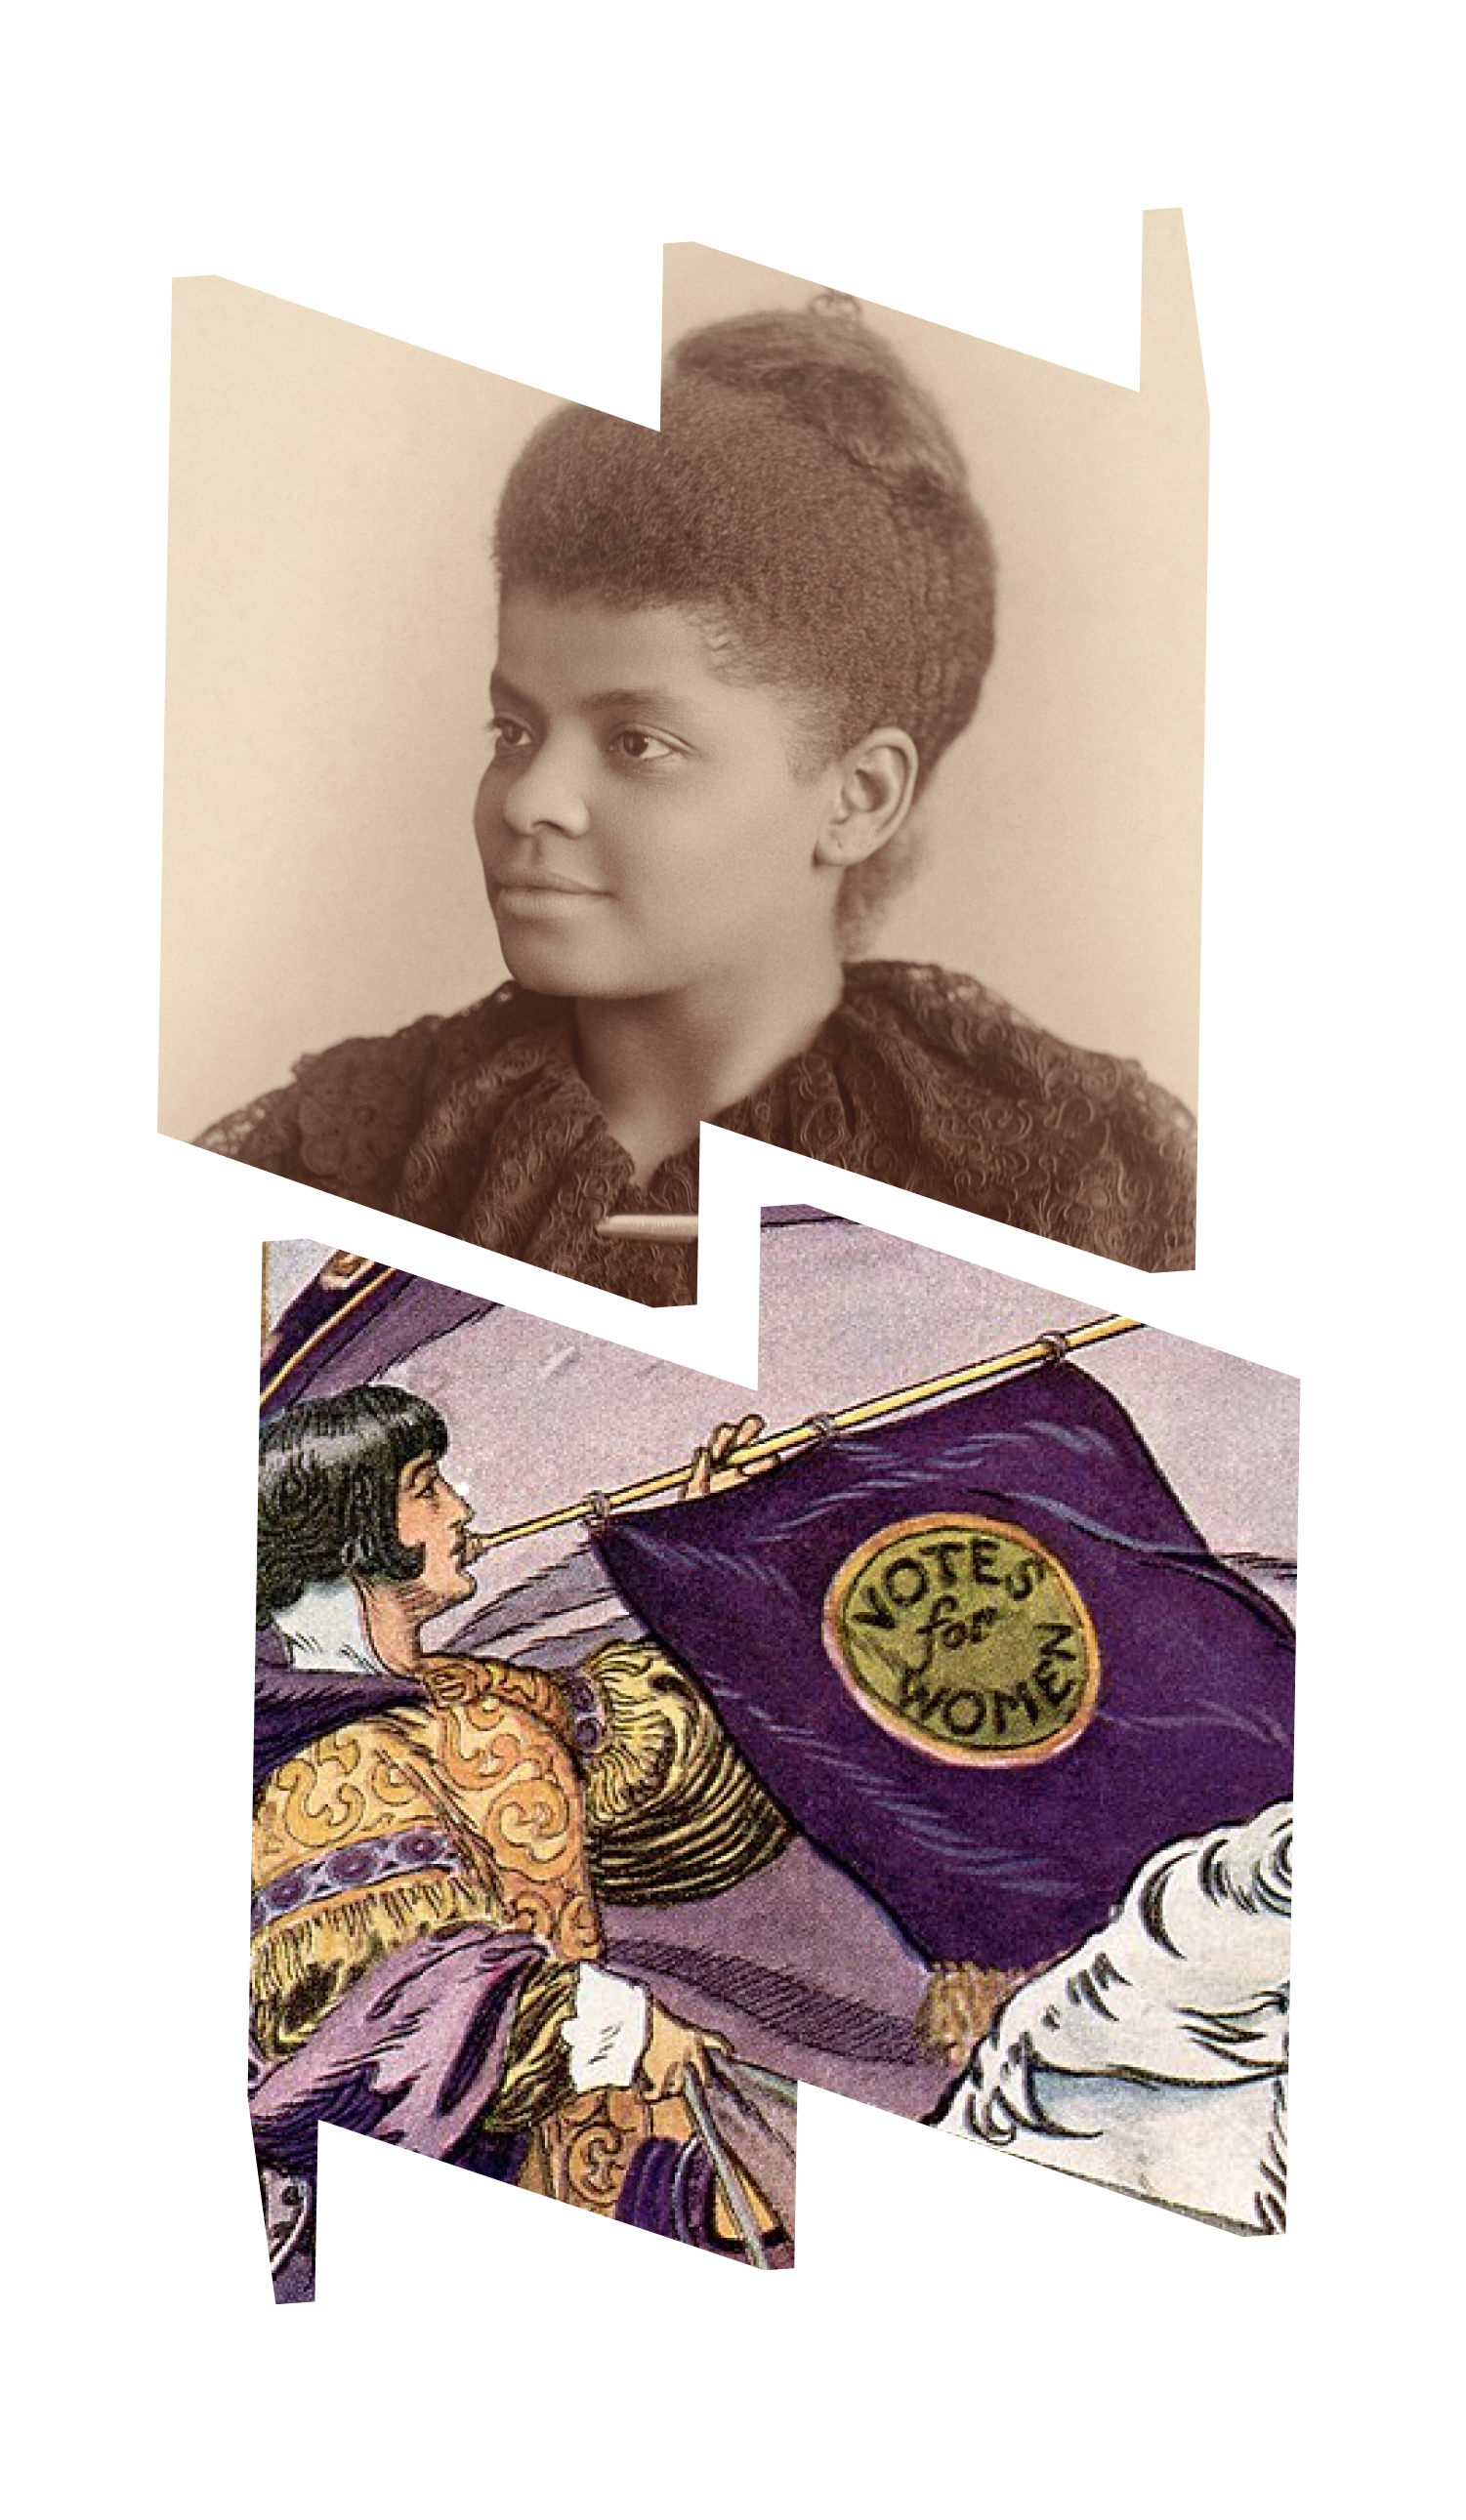 In top "W" frame, profile image of Ida B. Wells; in bottom "M" frame, illustration of woman on horse with "Votes for Women" banner.